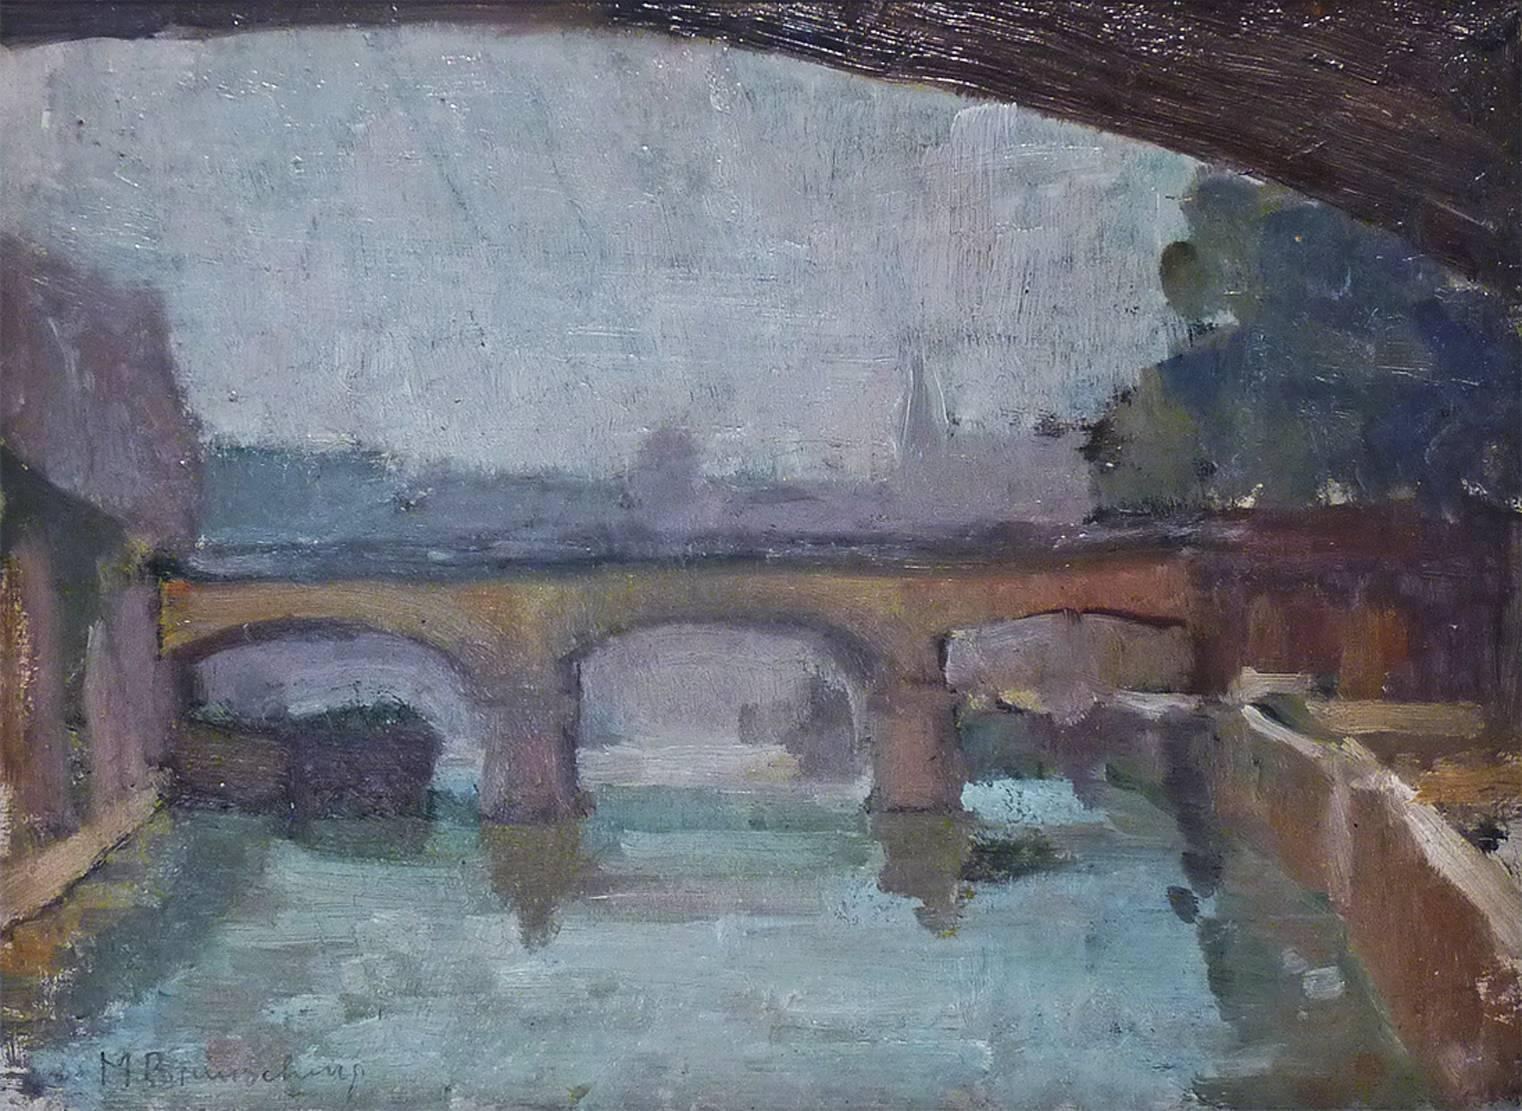 Paris View with Bridges at Isle de France, by french female artist Brunswig - Painting by Marcelle Brunswig